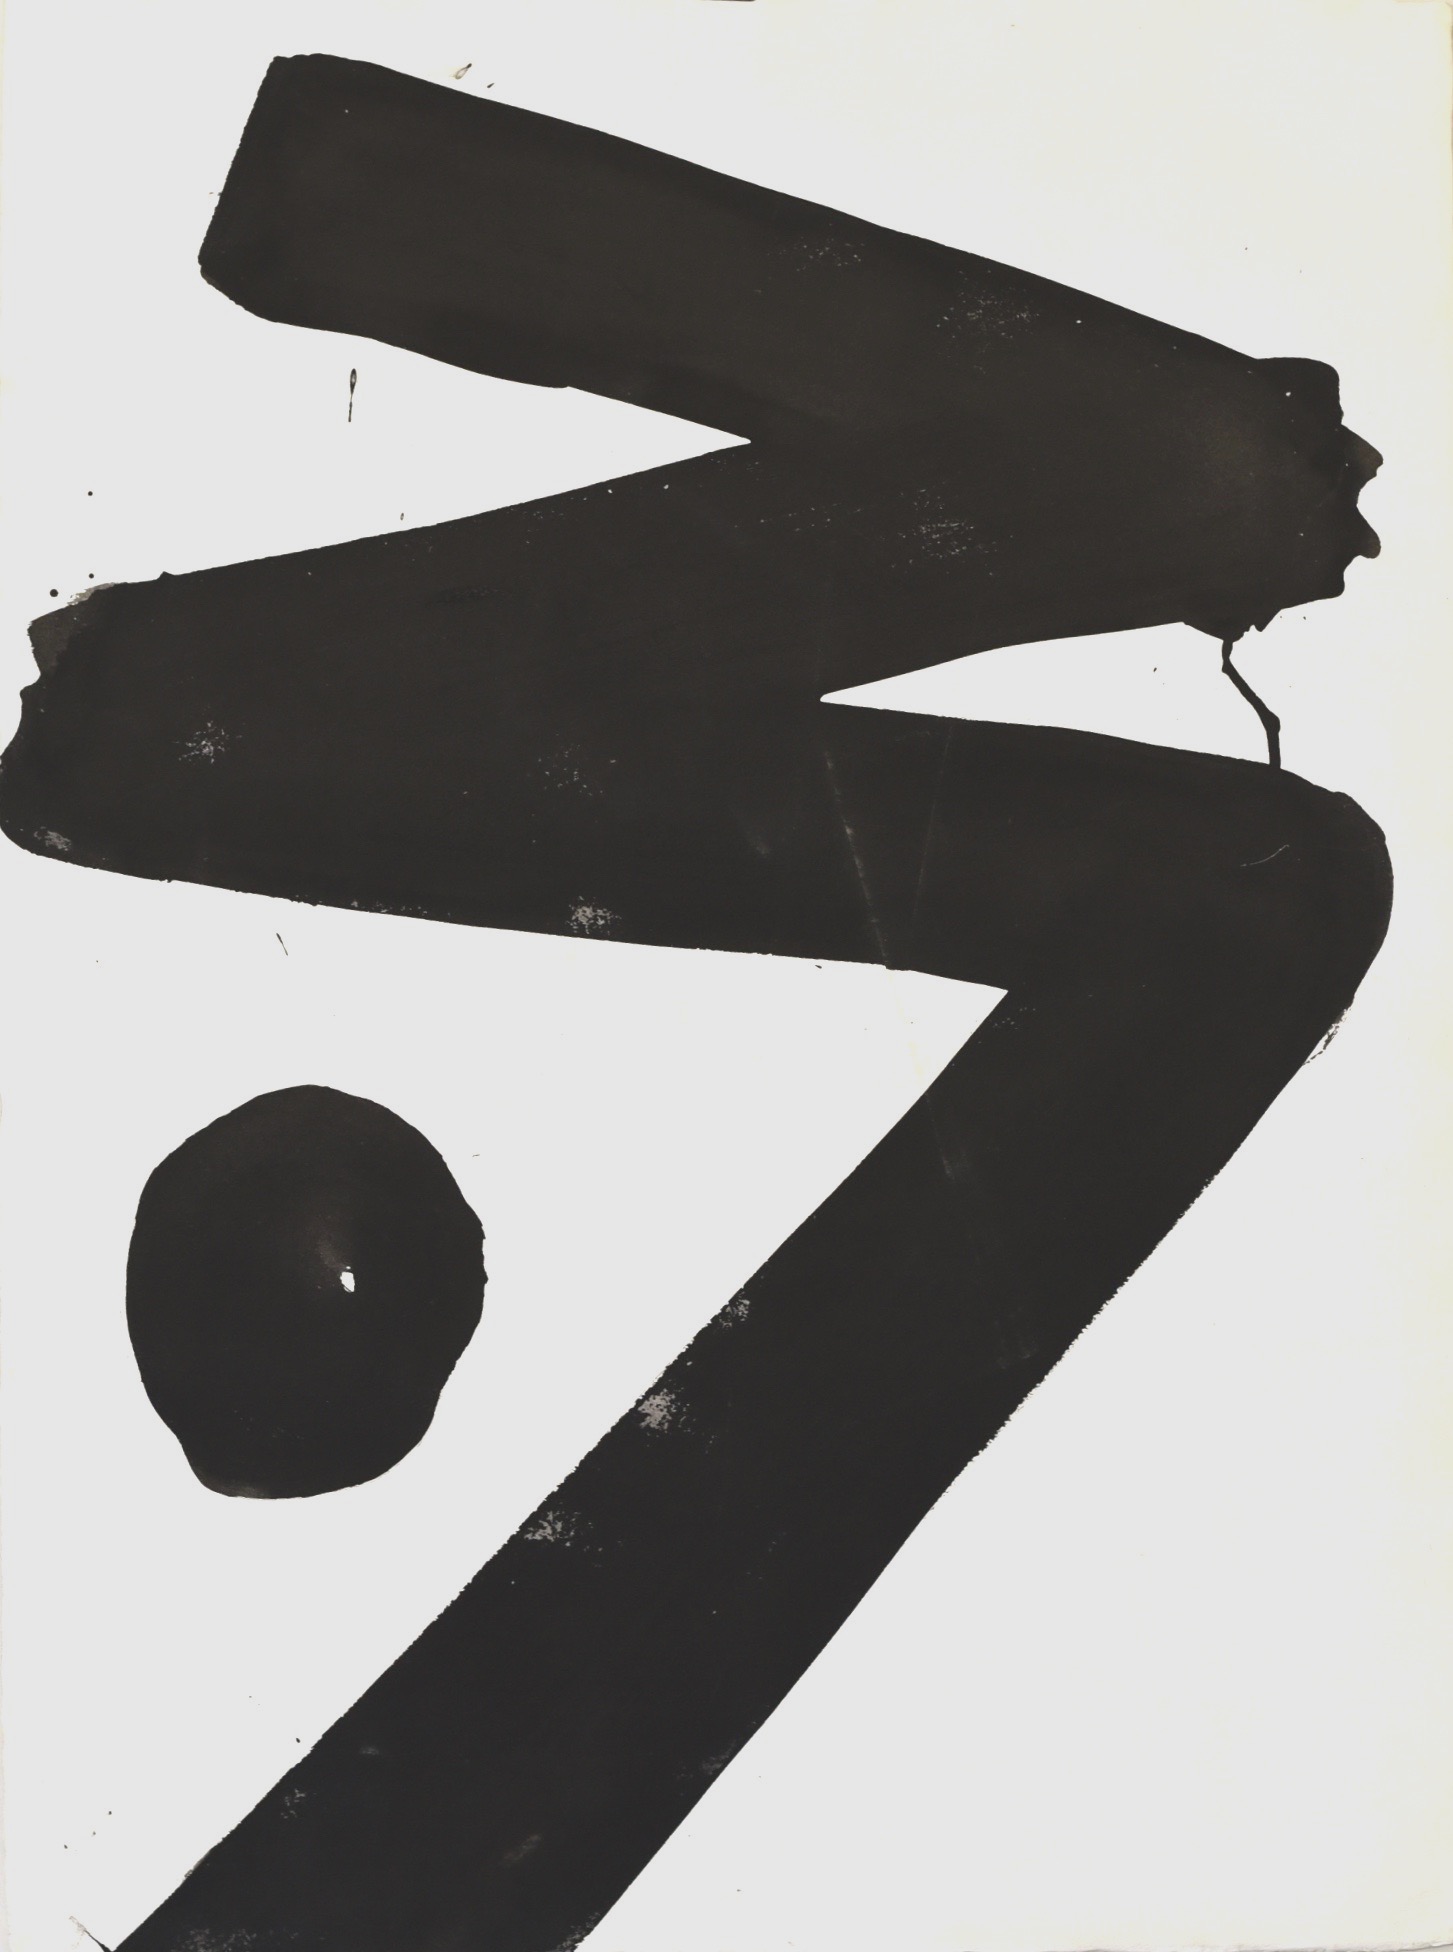 David Slivka, Untitled #2, early 70s, ink on paper,  31 x 23 in  $4000 